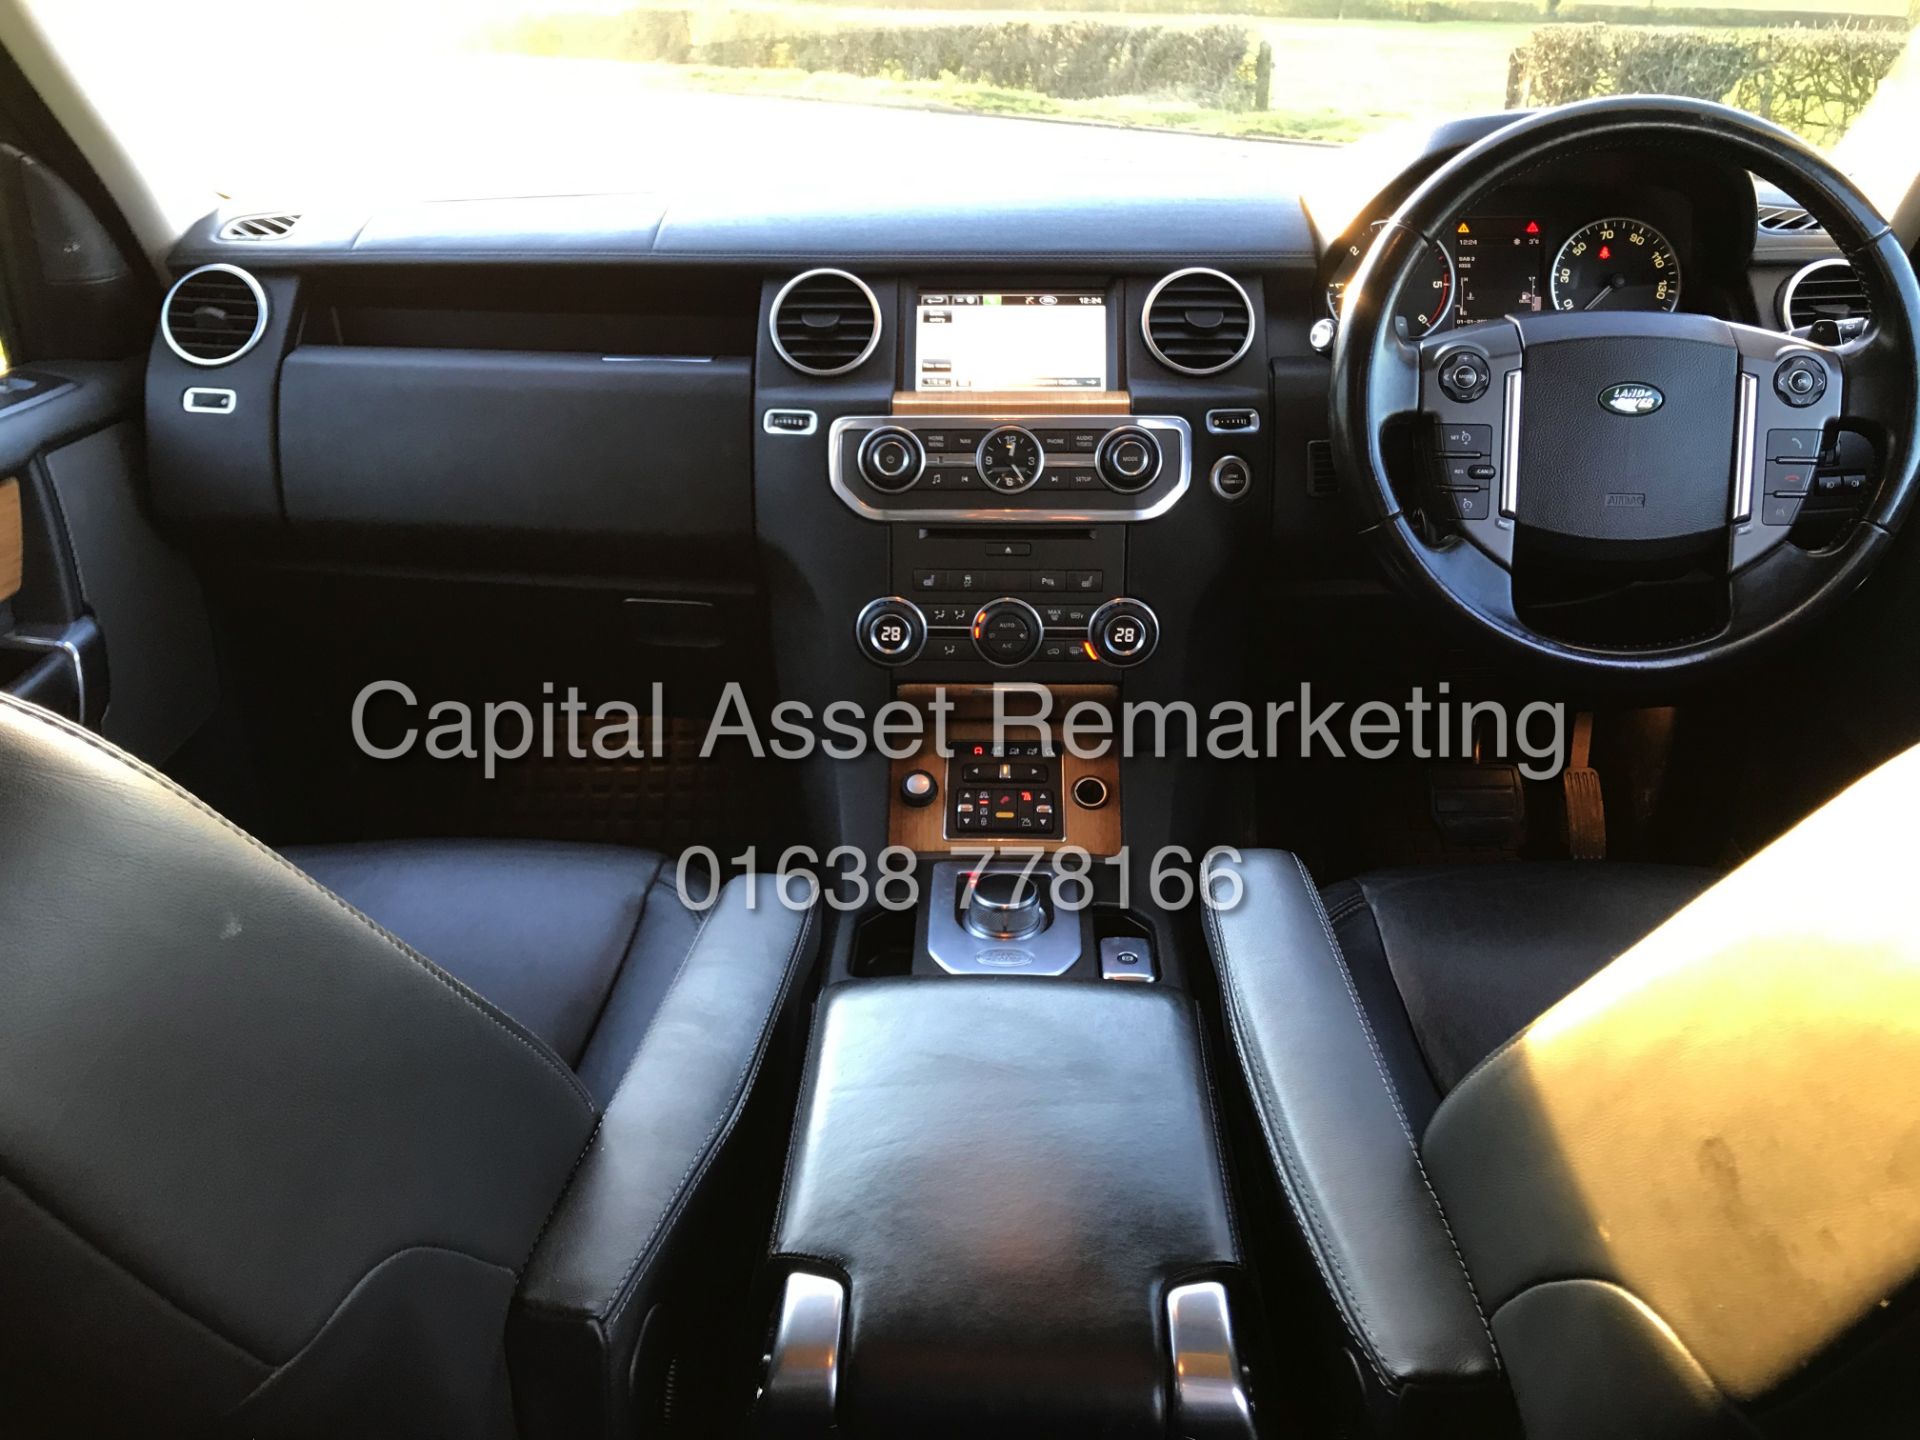 LAND ROVER DISCOVERY 4 "HSE" 3.0 SDV6 AUTOMATIC (13 REG) 7 SEATER **TOP OF THE RANGE** FULLY LOADED - Image 10 of 31